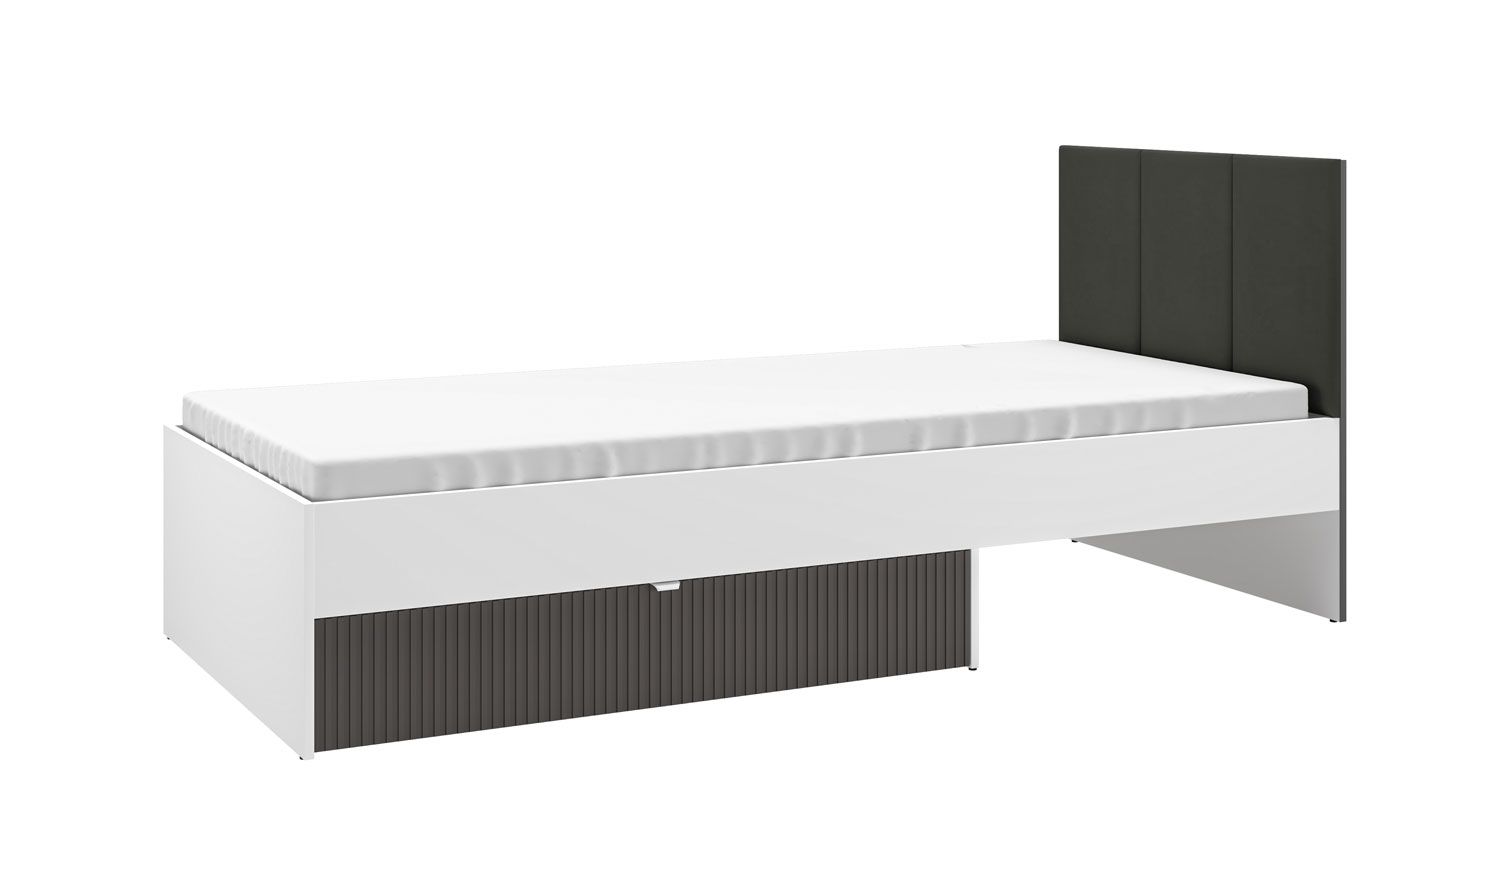 Single bed / guest bed with one bed drawer Mackinac 11, ABS edge protection, color: white / oak / graphite matt, lying surface: 90 x 200 cm, incl. slatted frame, practical and modern